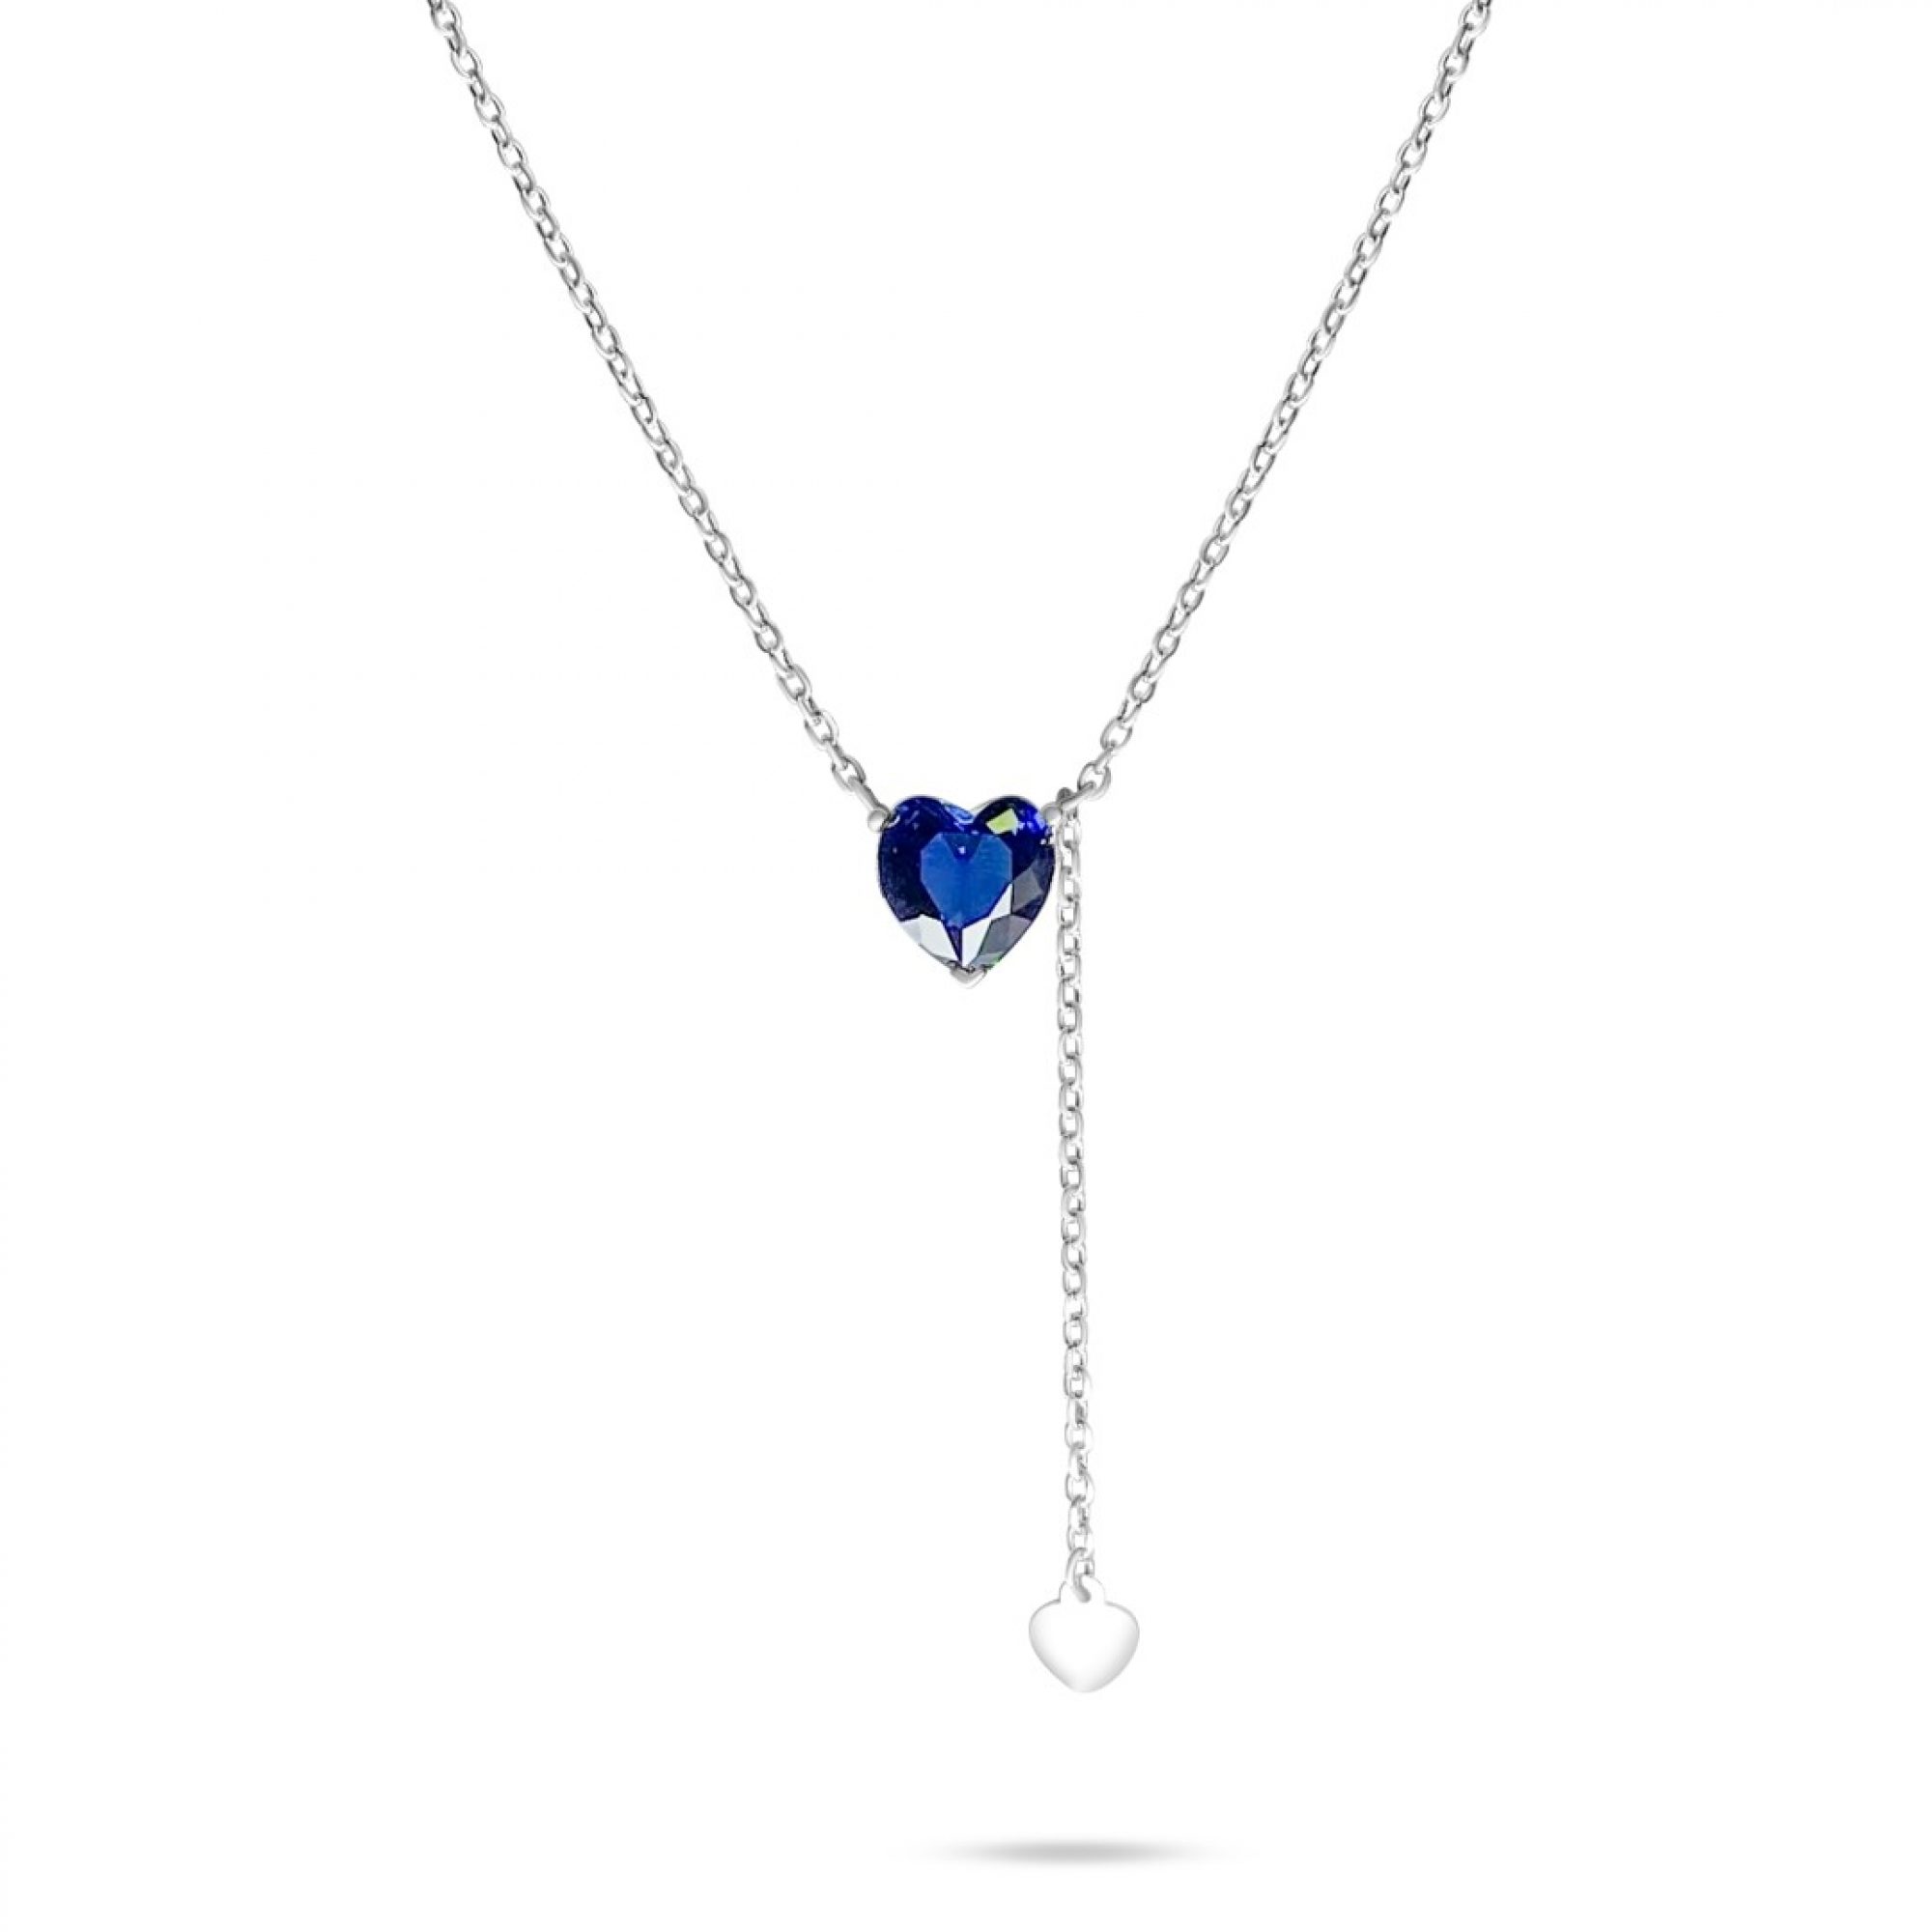 Heart necklace with sapphire stone